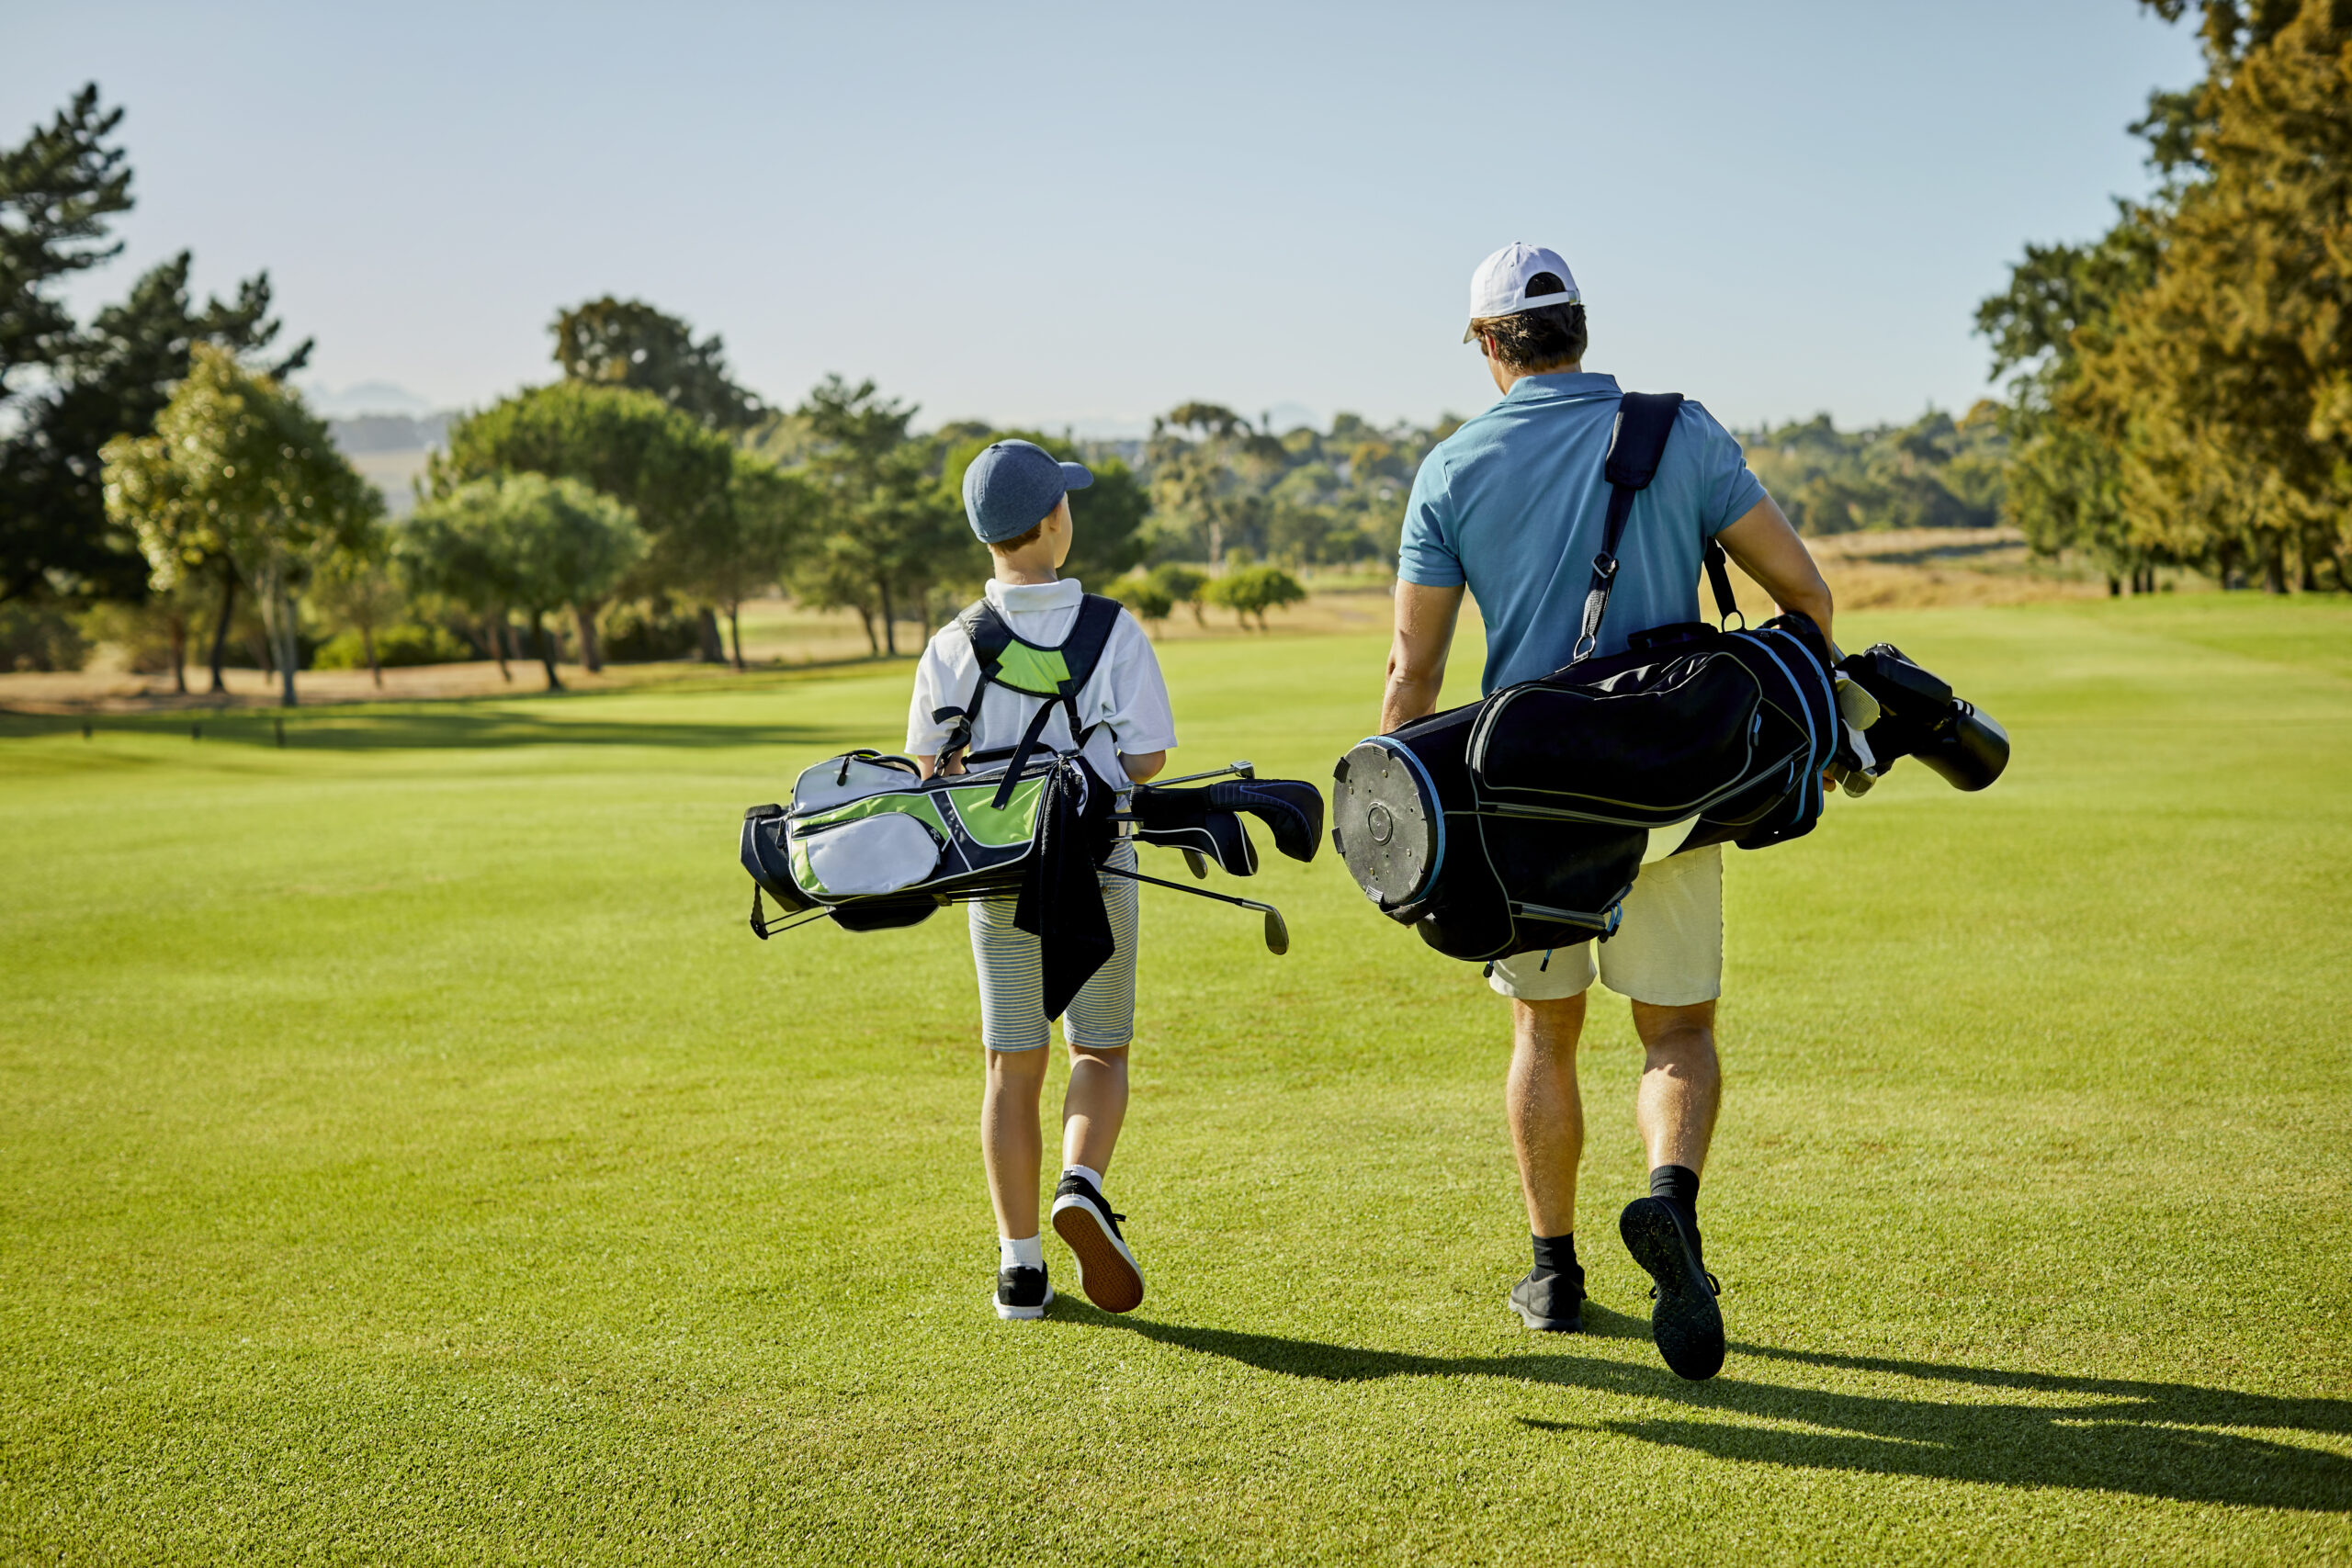 Rear view of man walking with boy on golf course. Father and son are carrying bags at sports field. They are in sportswear.